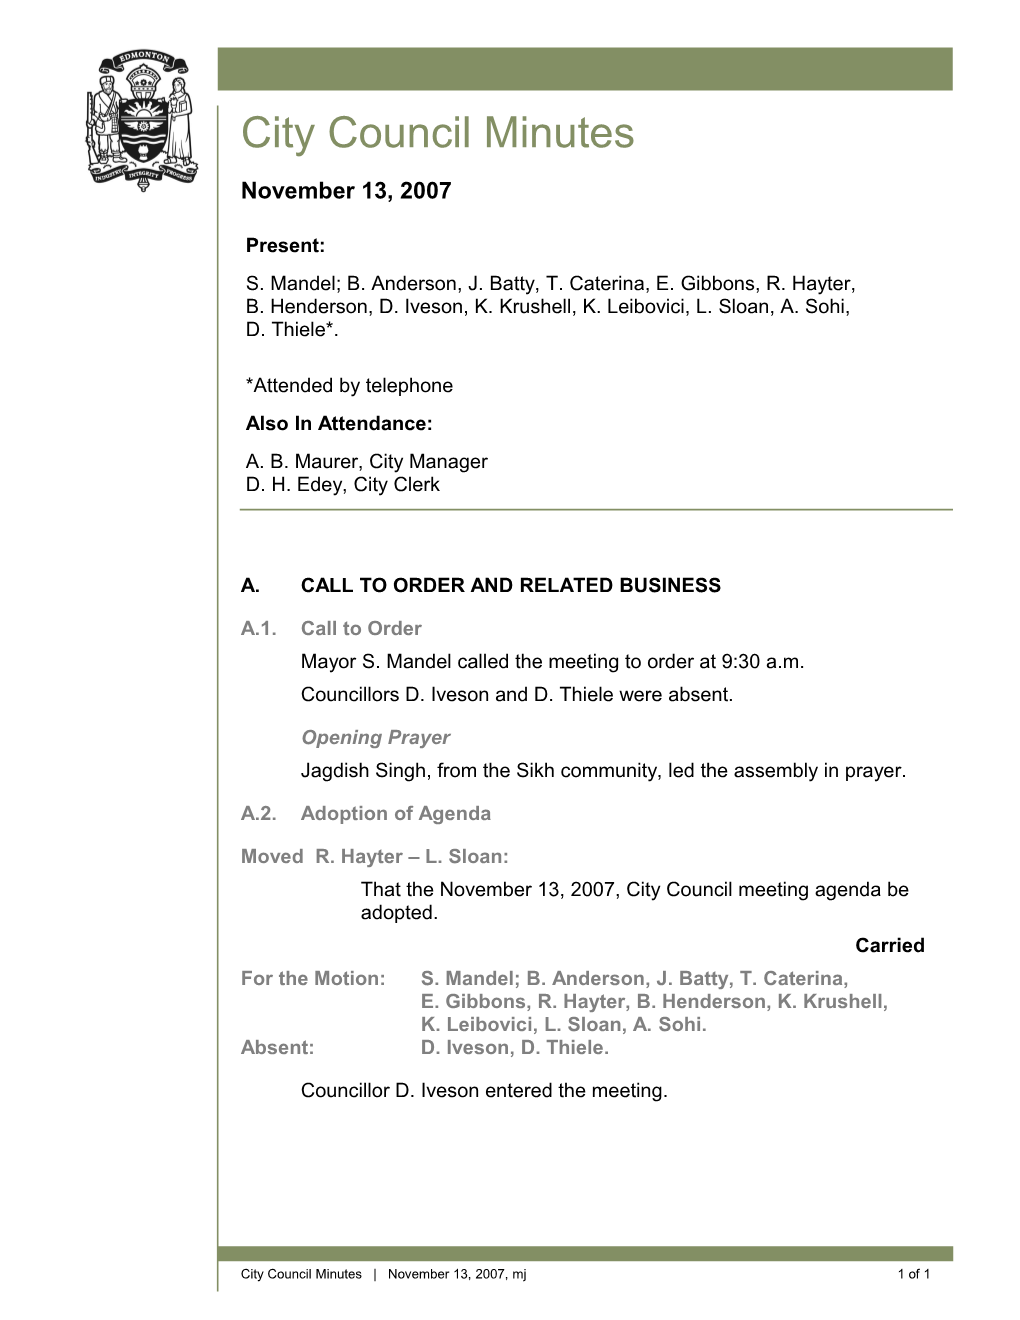 Minutes for City Council November 13, 2007 Meeting